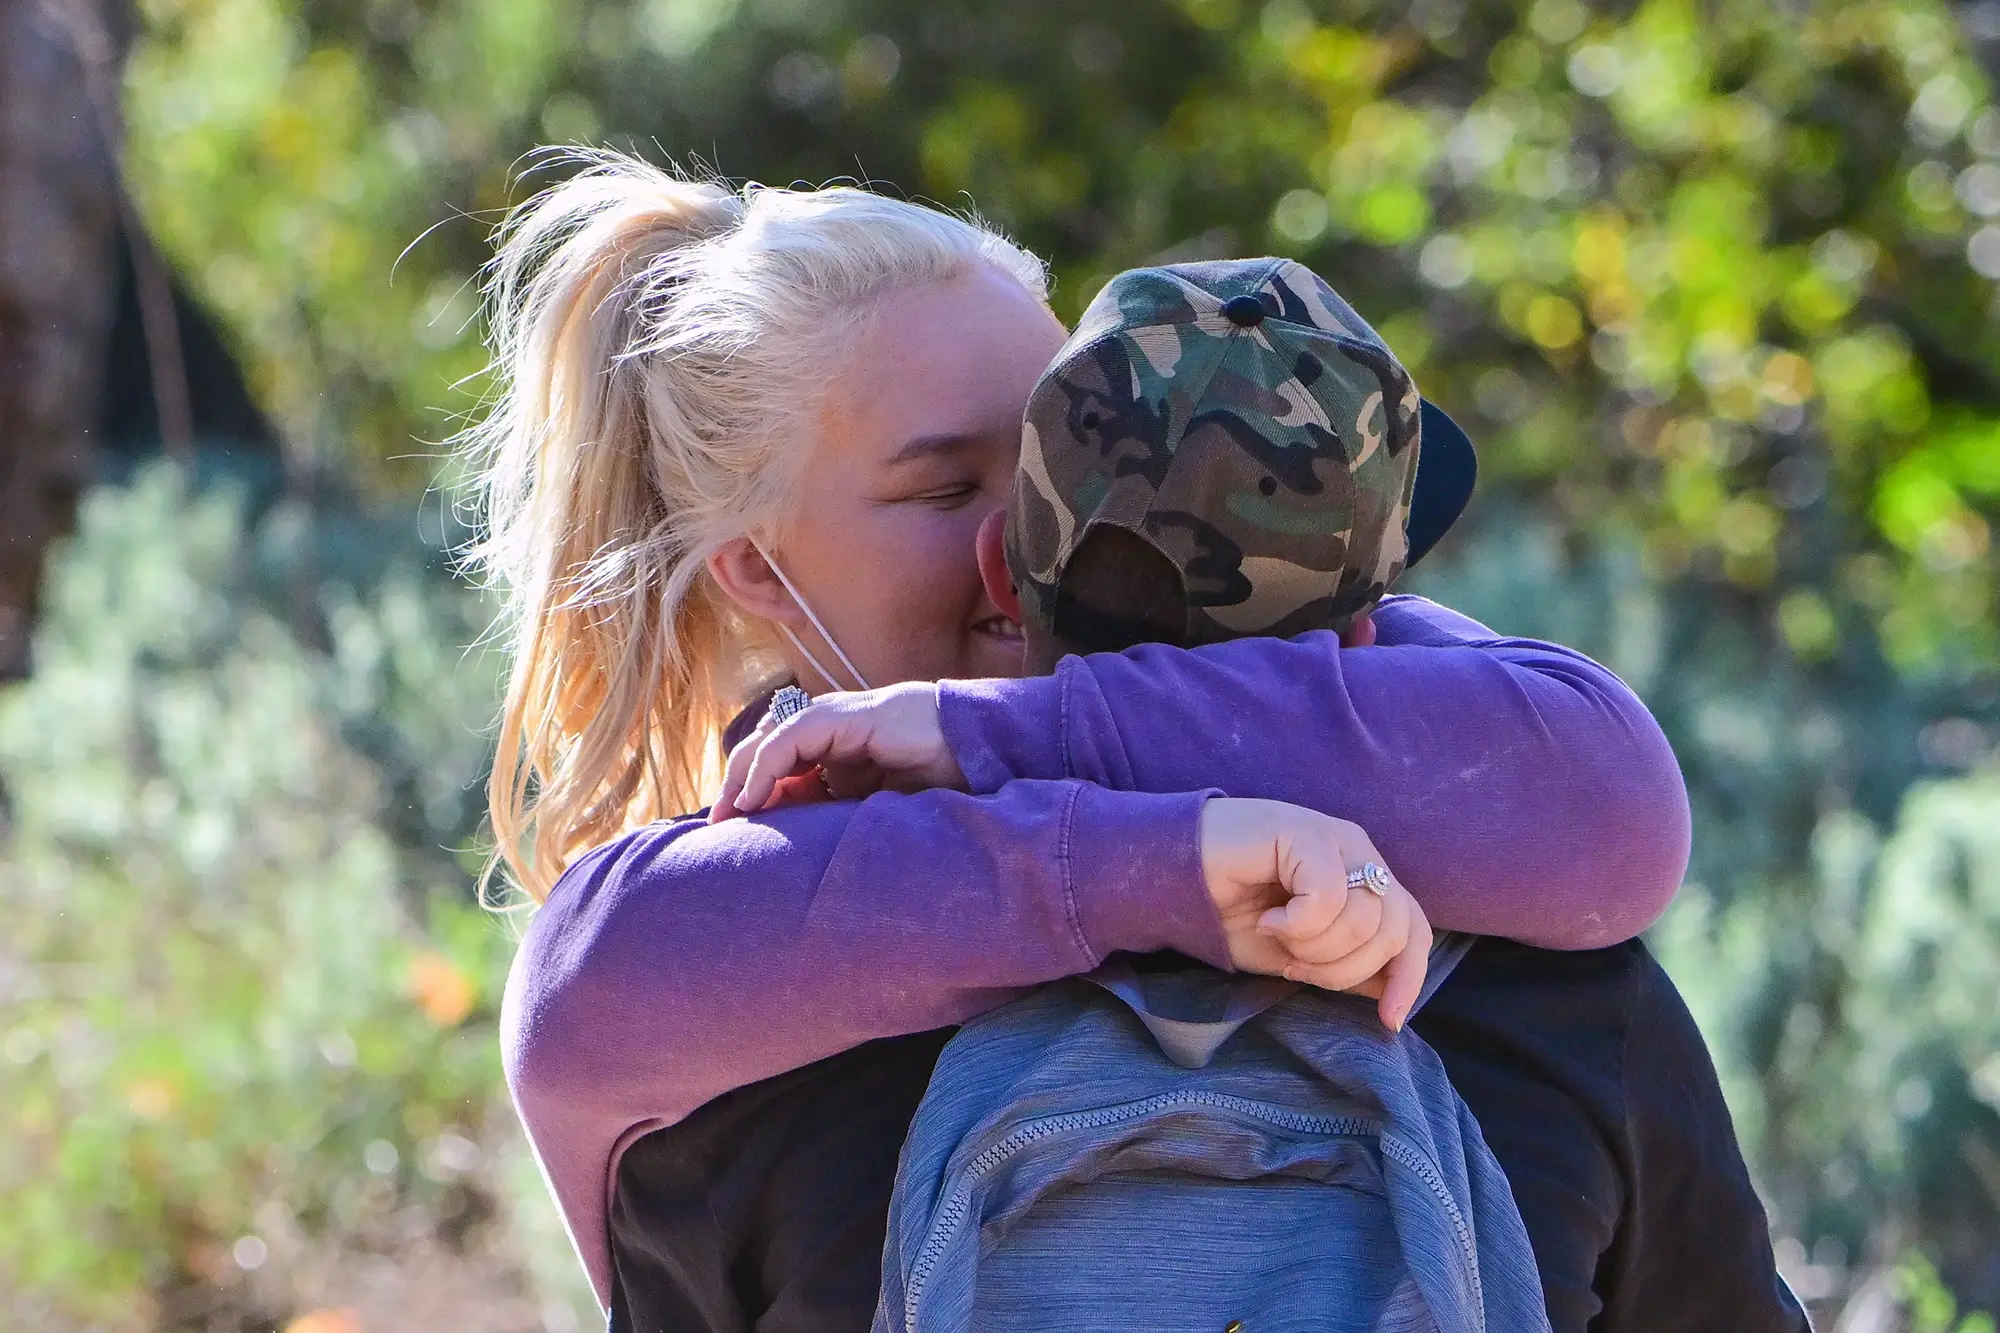 Mama June Snuggles Up To New, 34-Year-Old Boyfriend While Ex Geno Doak Serves Prison Time For Drugs!